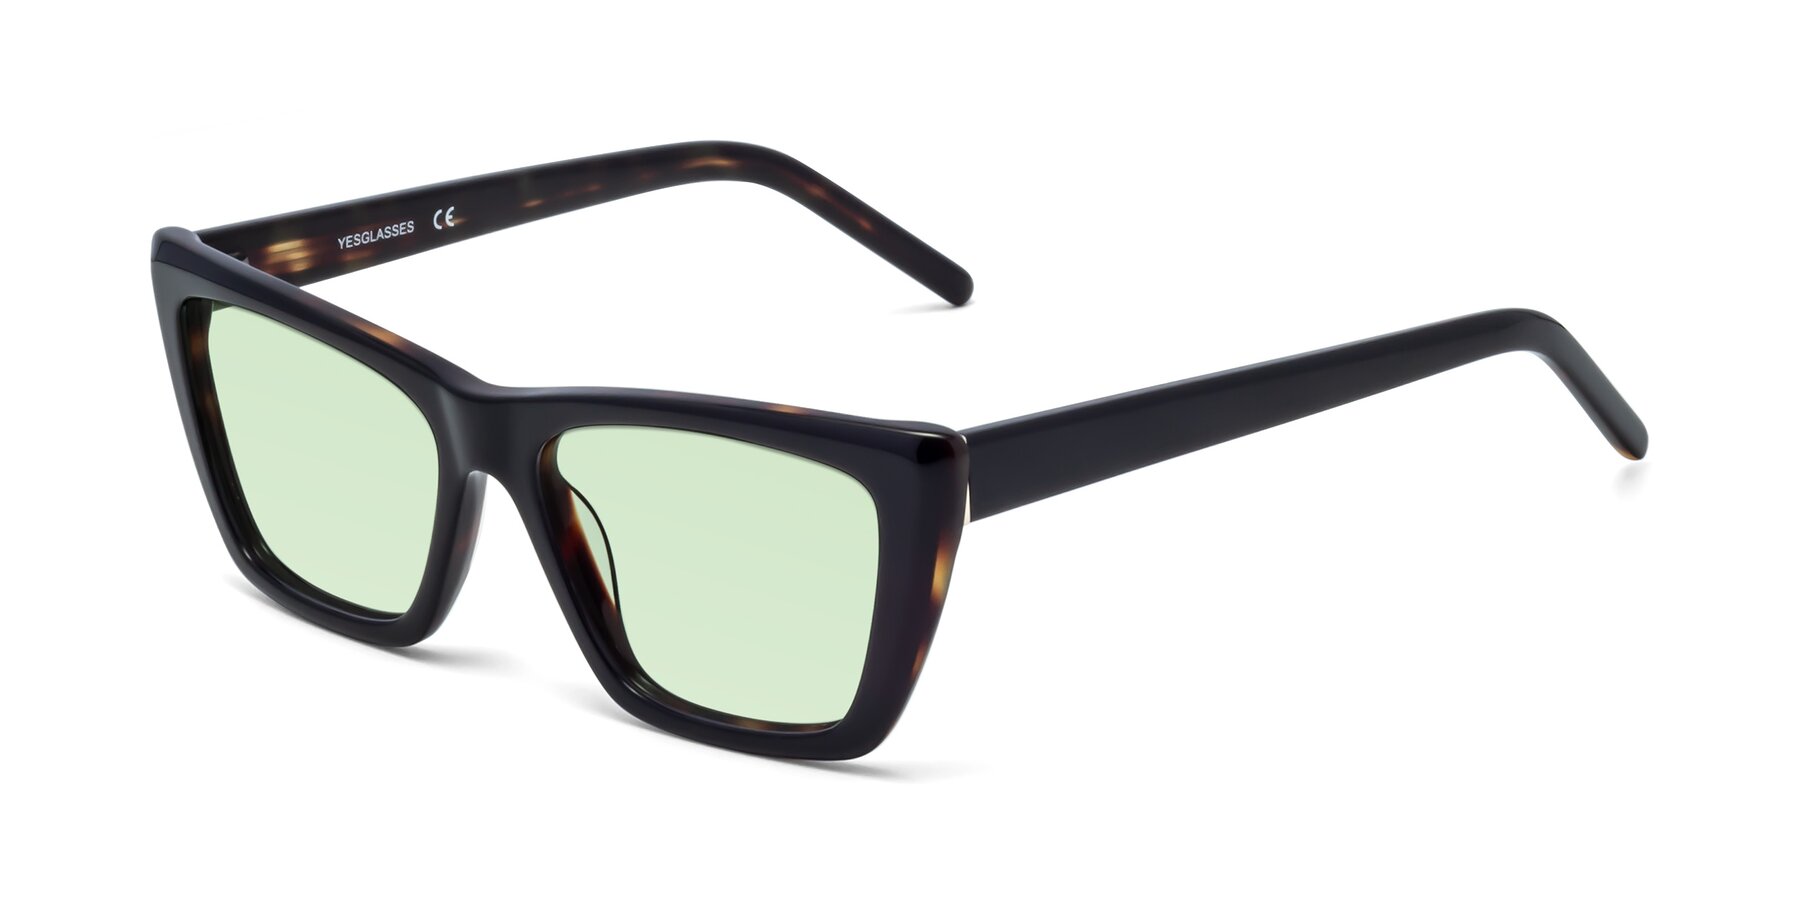 Angle of 1494 in Tortoise with Light Green Tinted Lenses